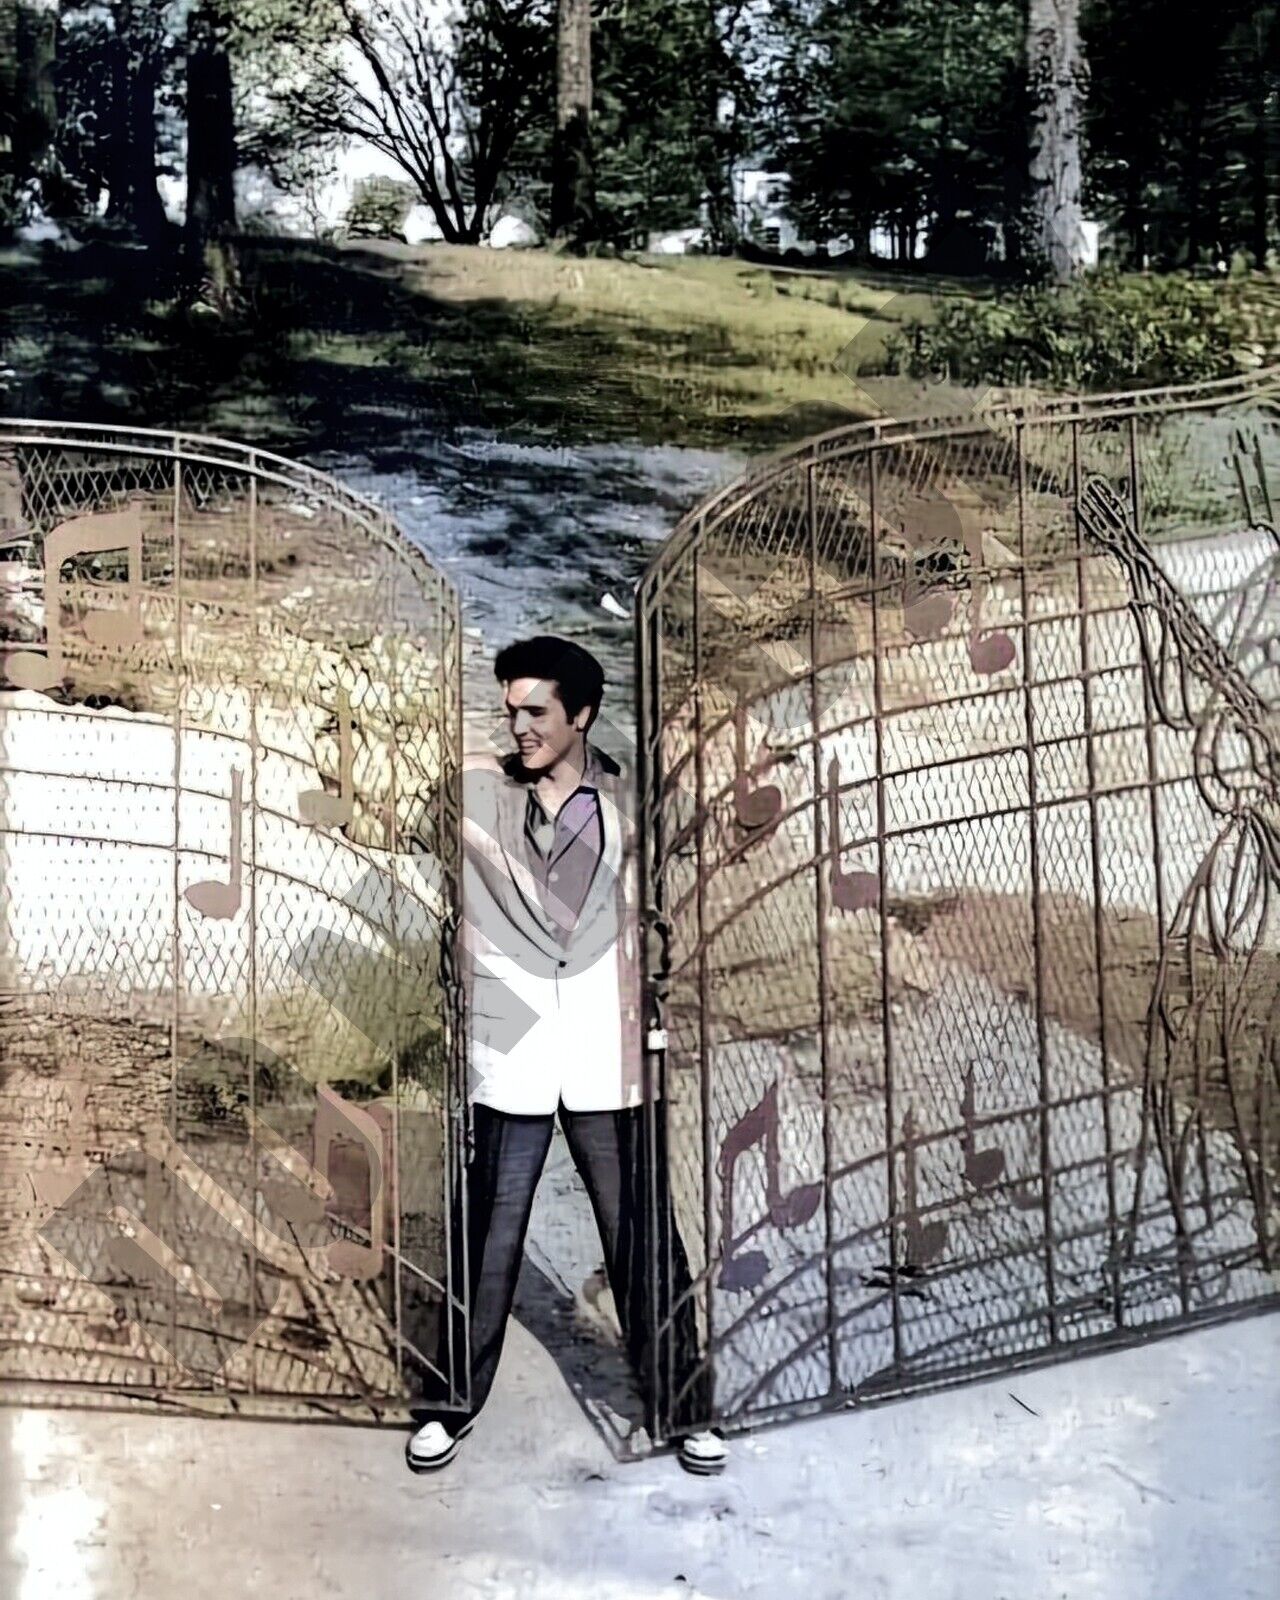 1957 Elvis Presley at Graceland Looking At the Newly Installed Gates 8x10 Photo